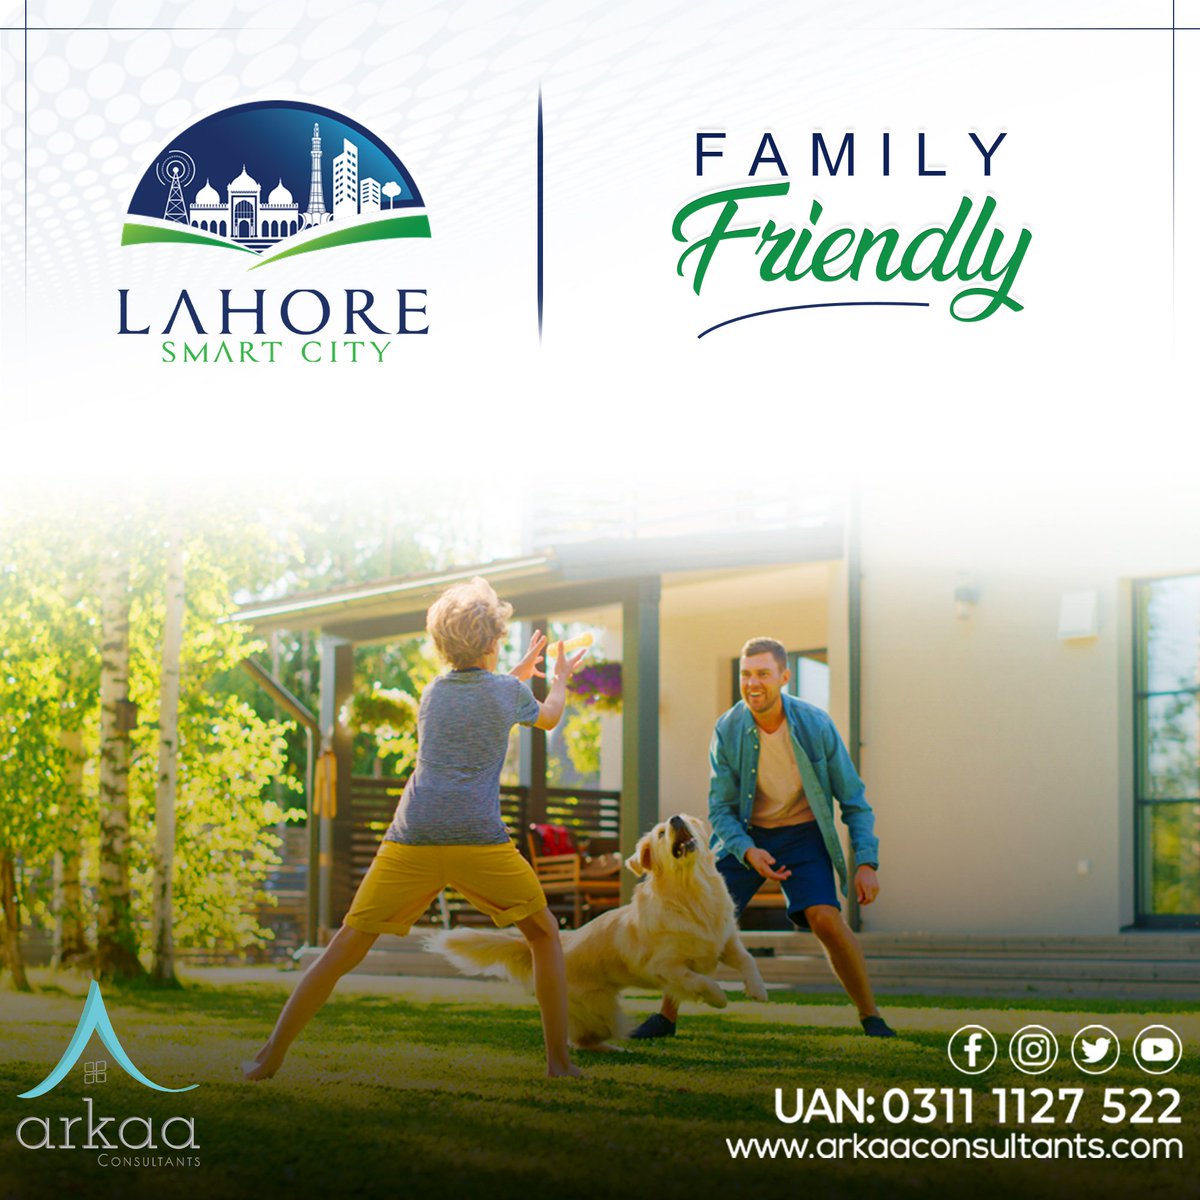 Experience the Perfect Family-Friendly Community at Lahore Smart City

#Arkaa #lahoresmartcity #arkaaconsultants #smartinterchange #SmartCities #lscresidential #StayTuned #nextbigthing #lsc #lahore  #Progressivesociety #familyfriendly #peaceofmindmatters #comfortandconvenience